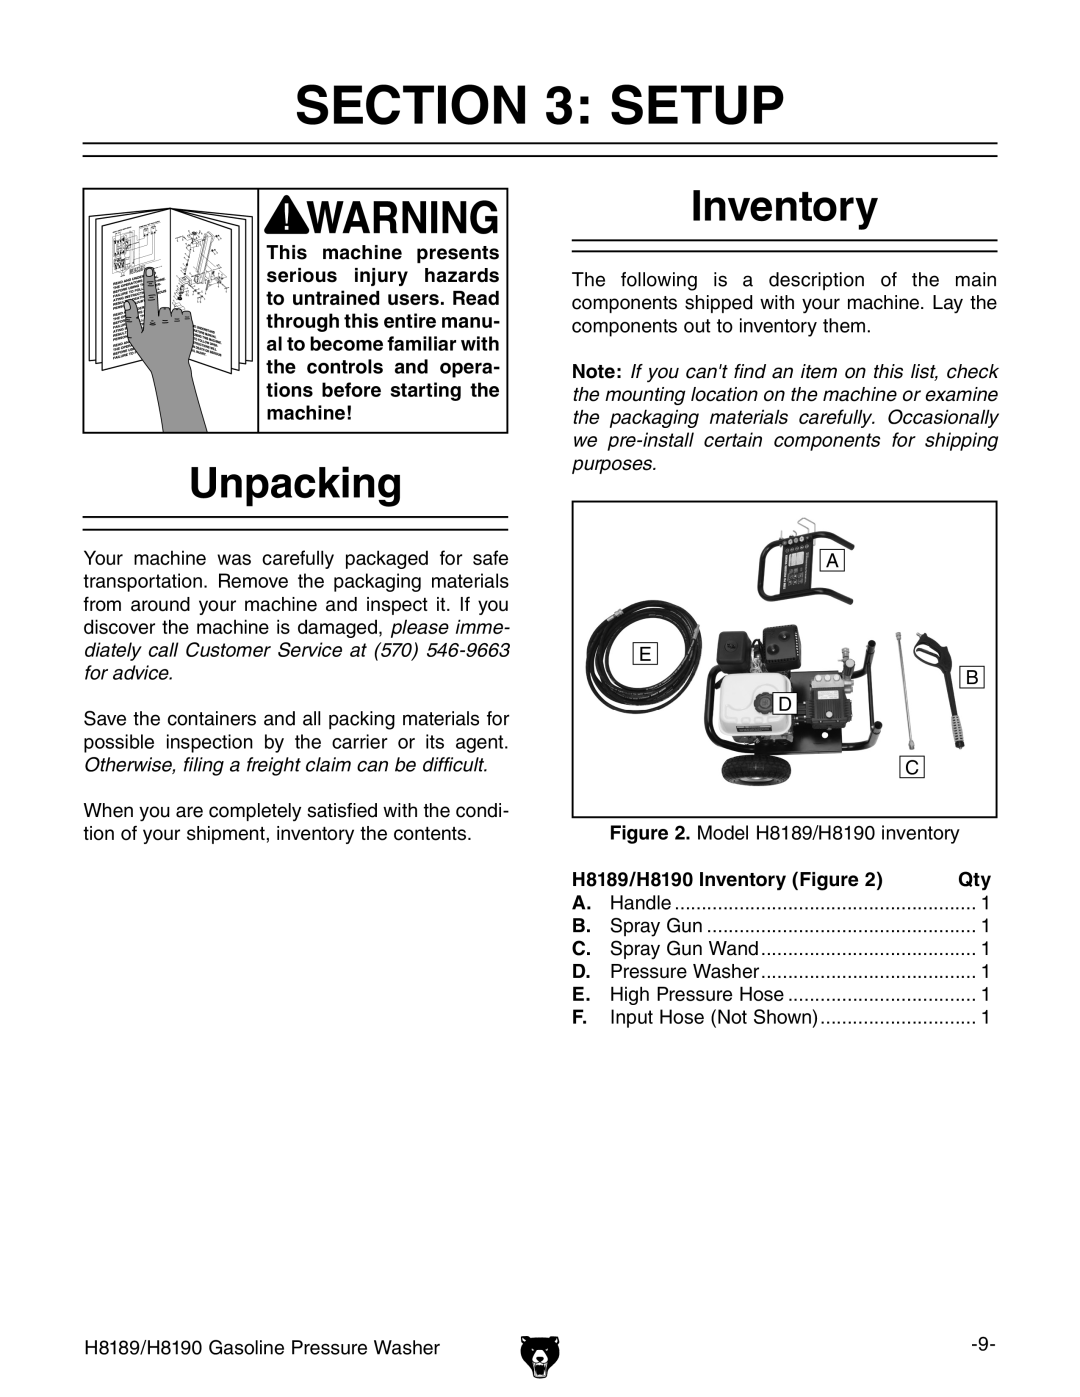 Grizzly H8189/H8190 owner manual Setup, Unpacking, Inventory 